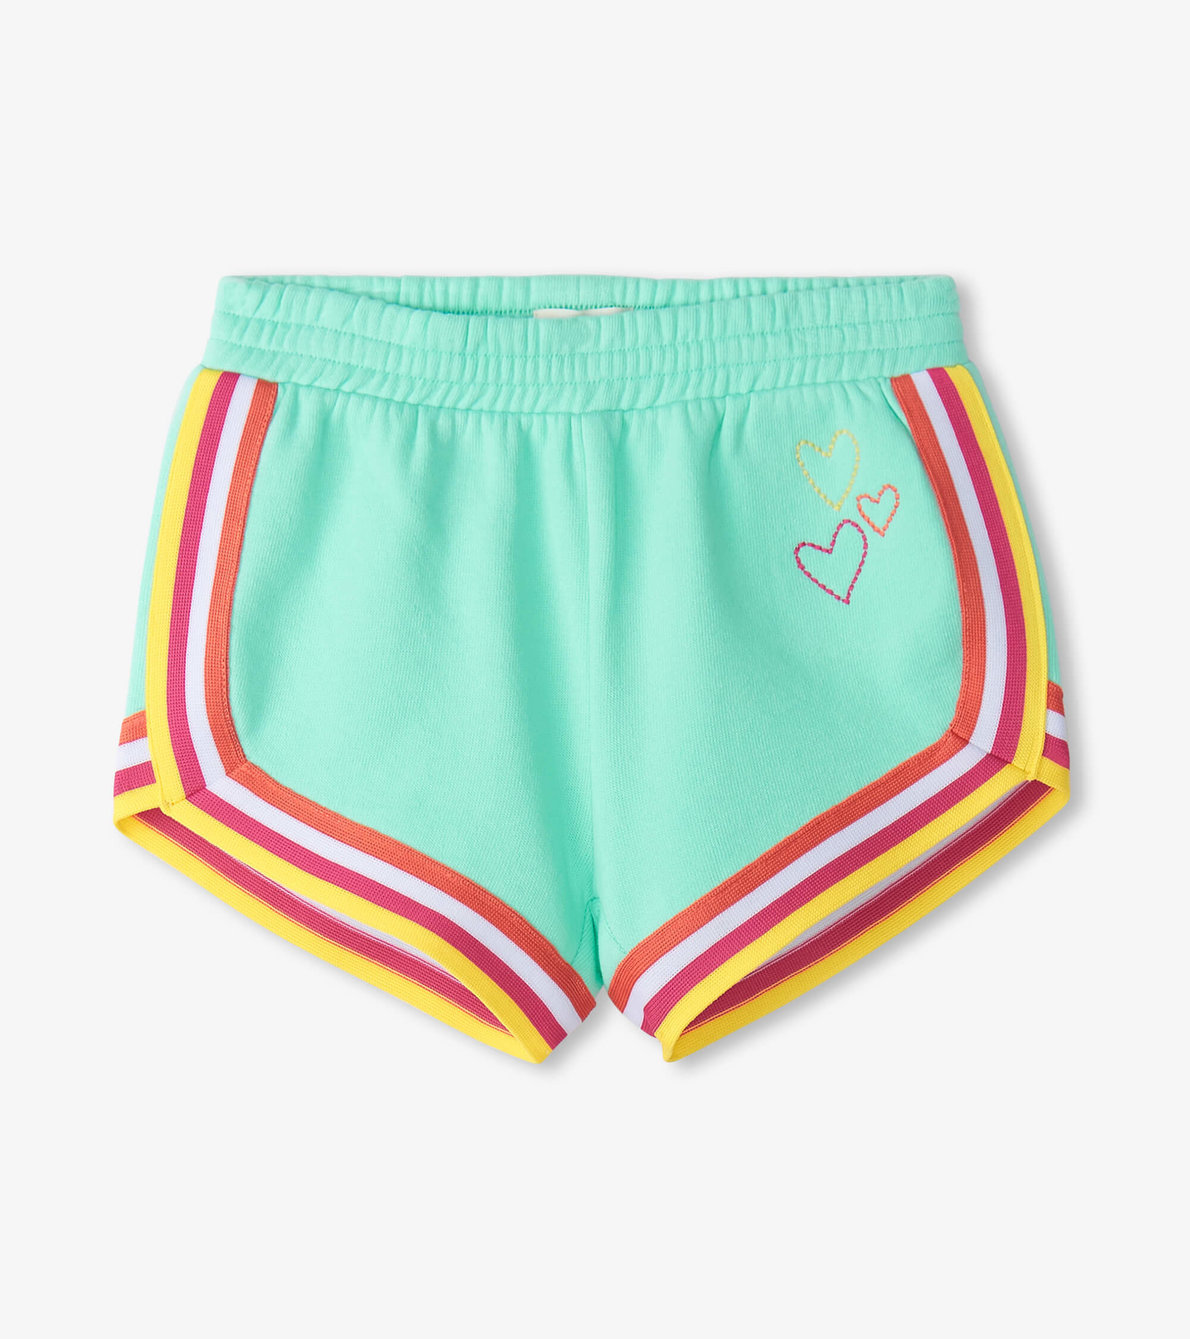 View larger image of Girls Sunny Days Jogging Shorts